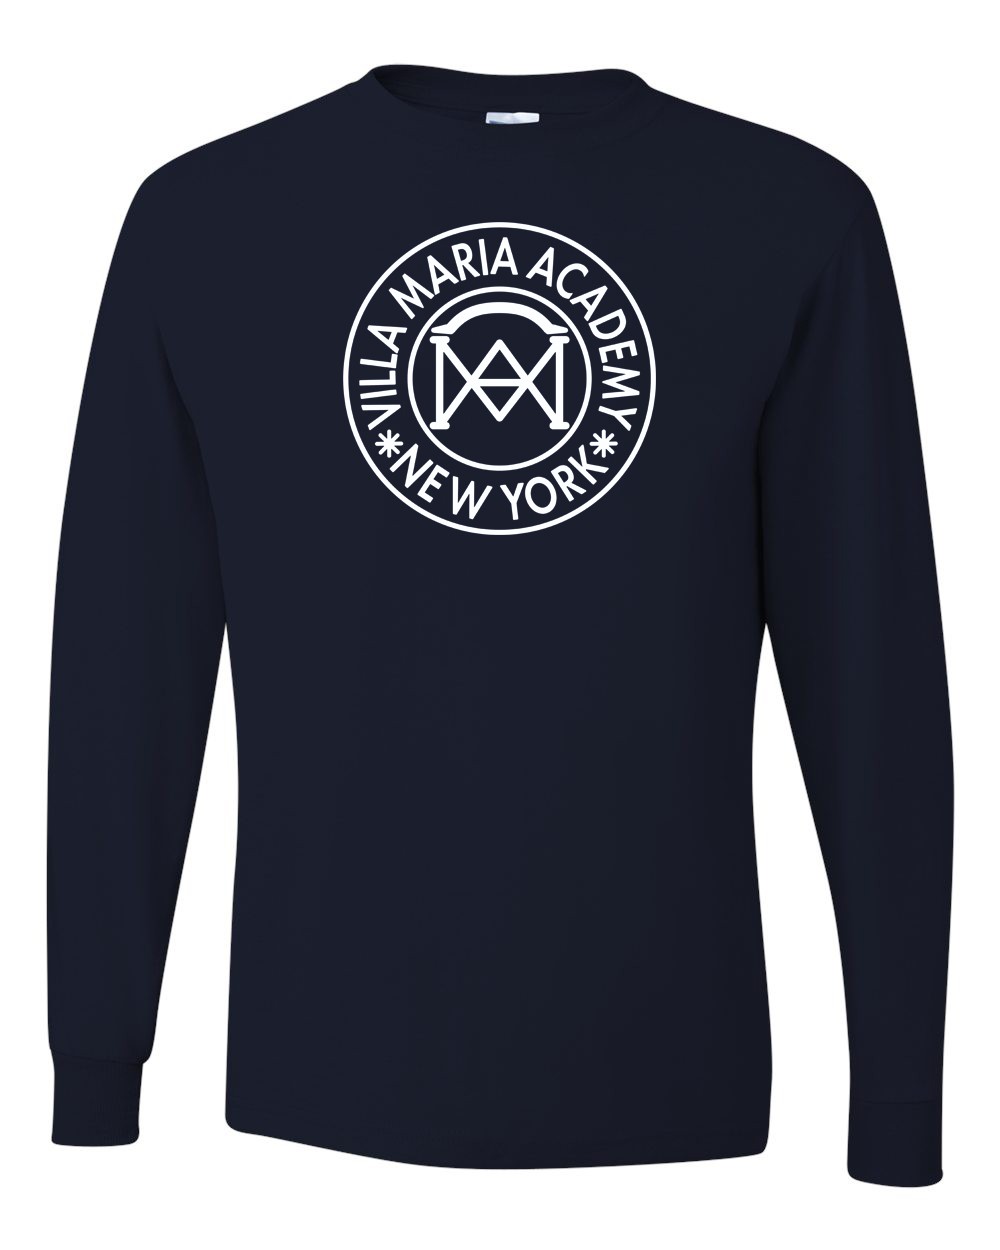 VMA STAFF L/S T-Shirt w/ Logo - Please Allow 2-3 Weeks for Delivery